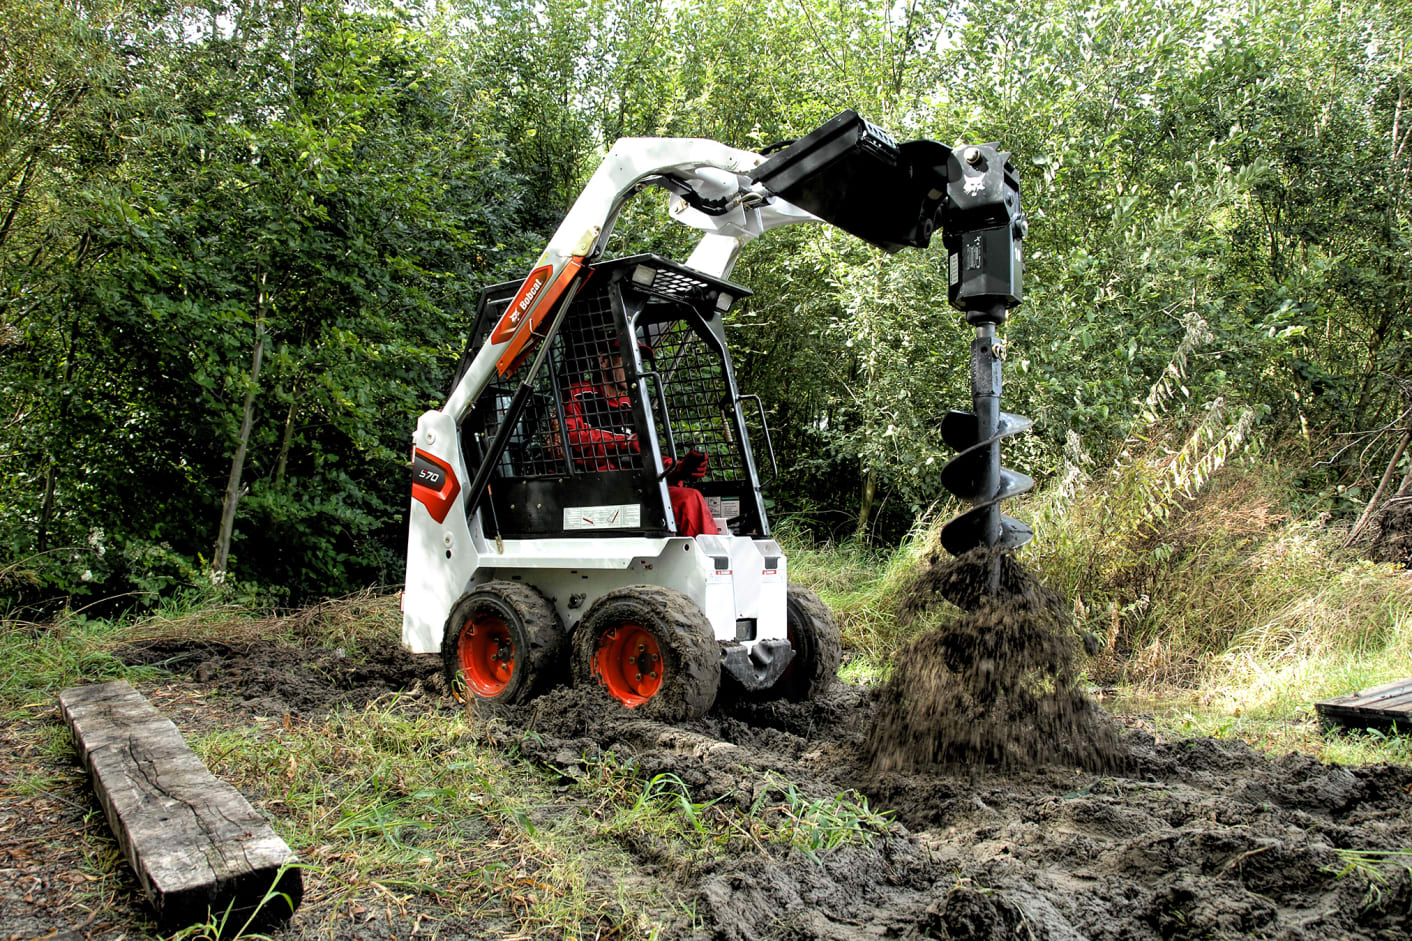 Browse Specs and more for the Bobcat S70 Skid-Steer Loader - Bobcat of the Rockies